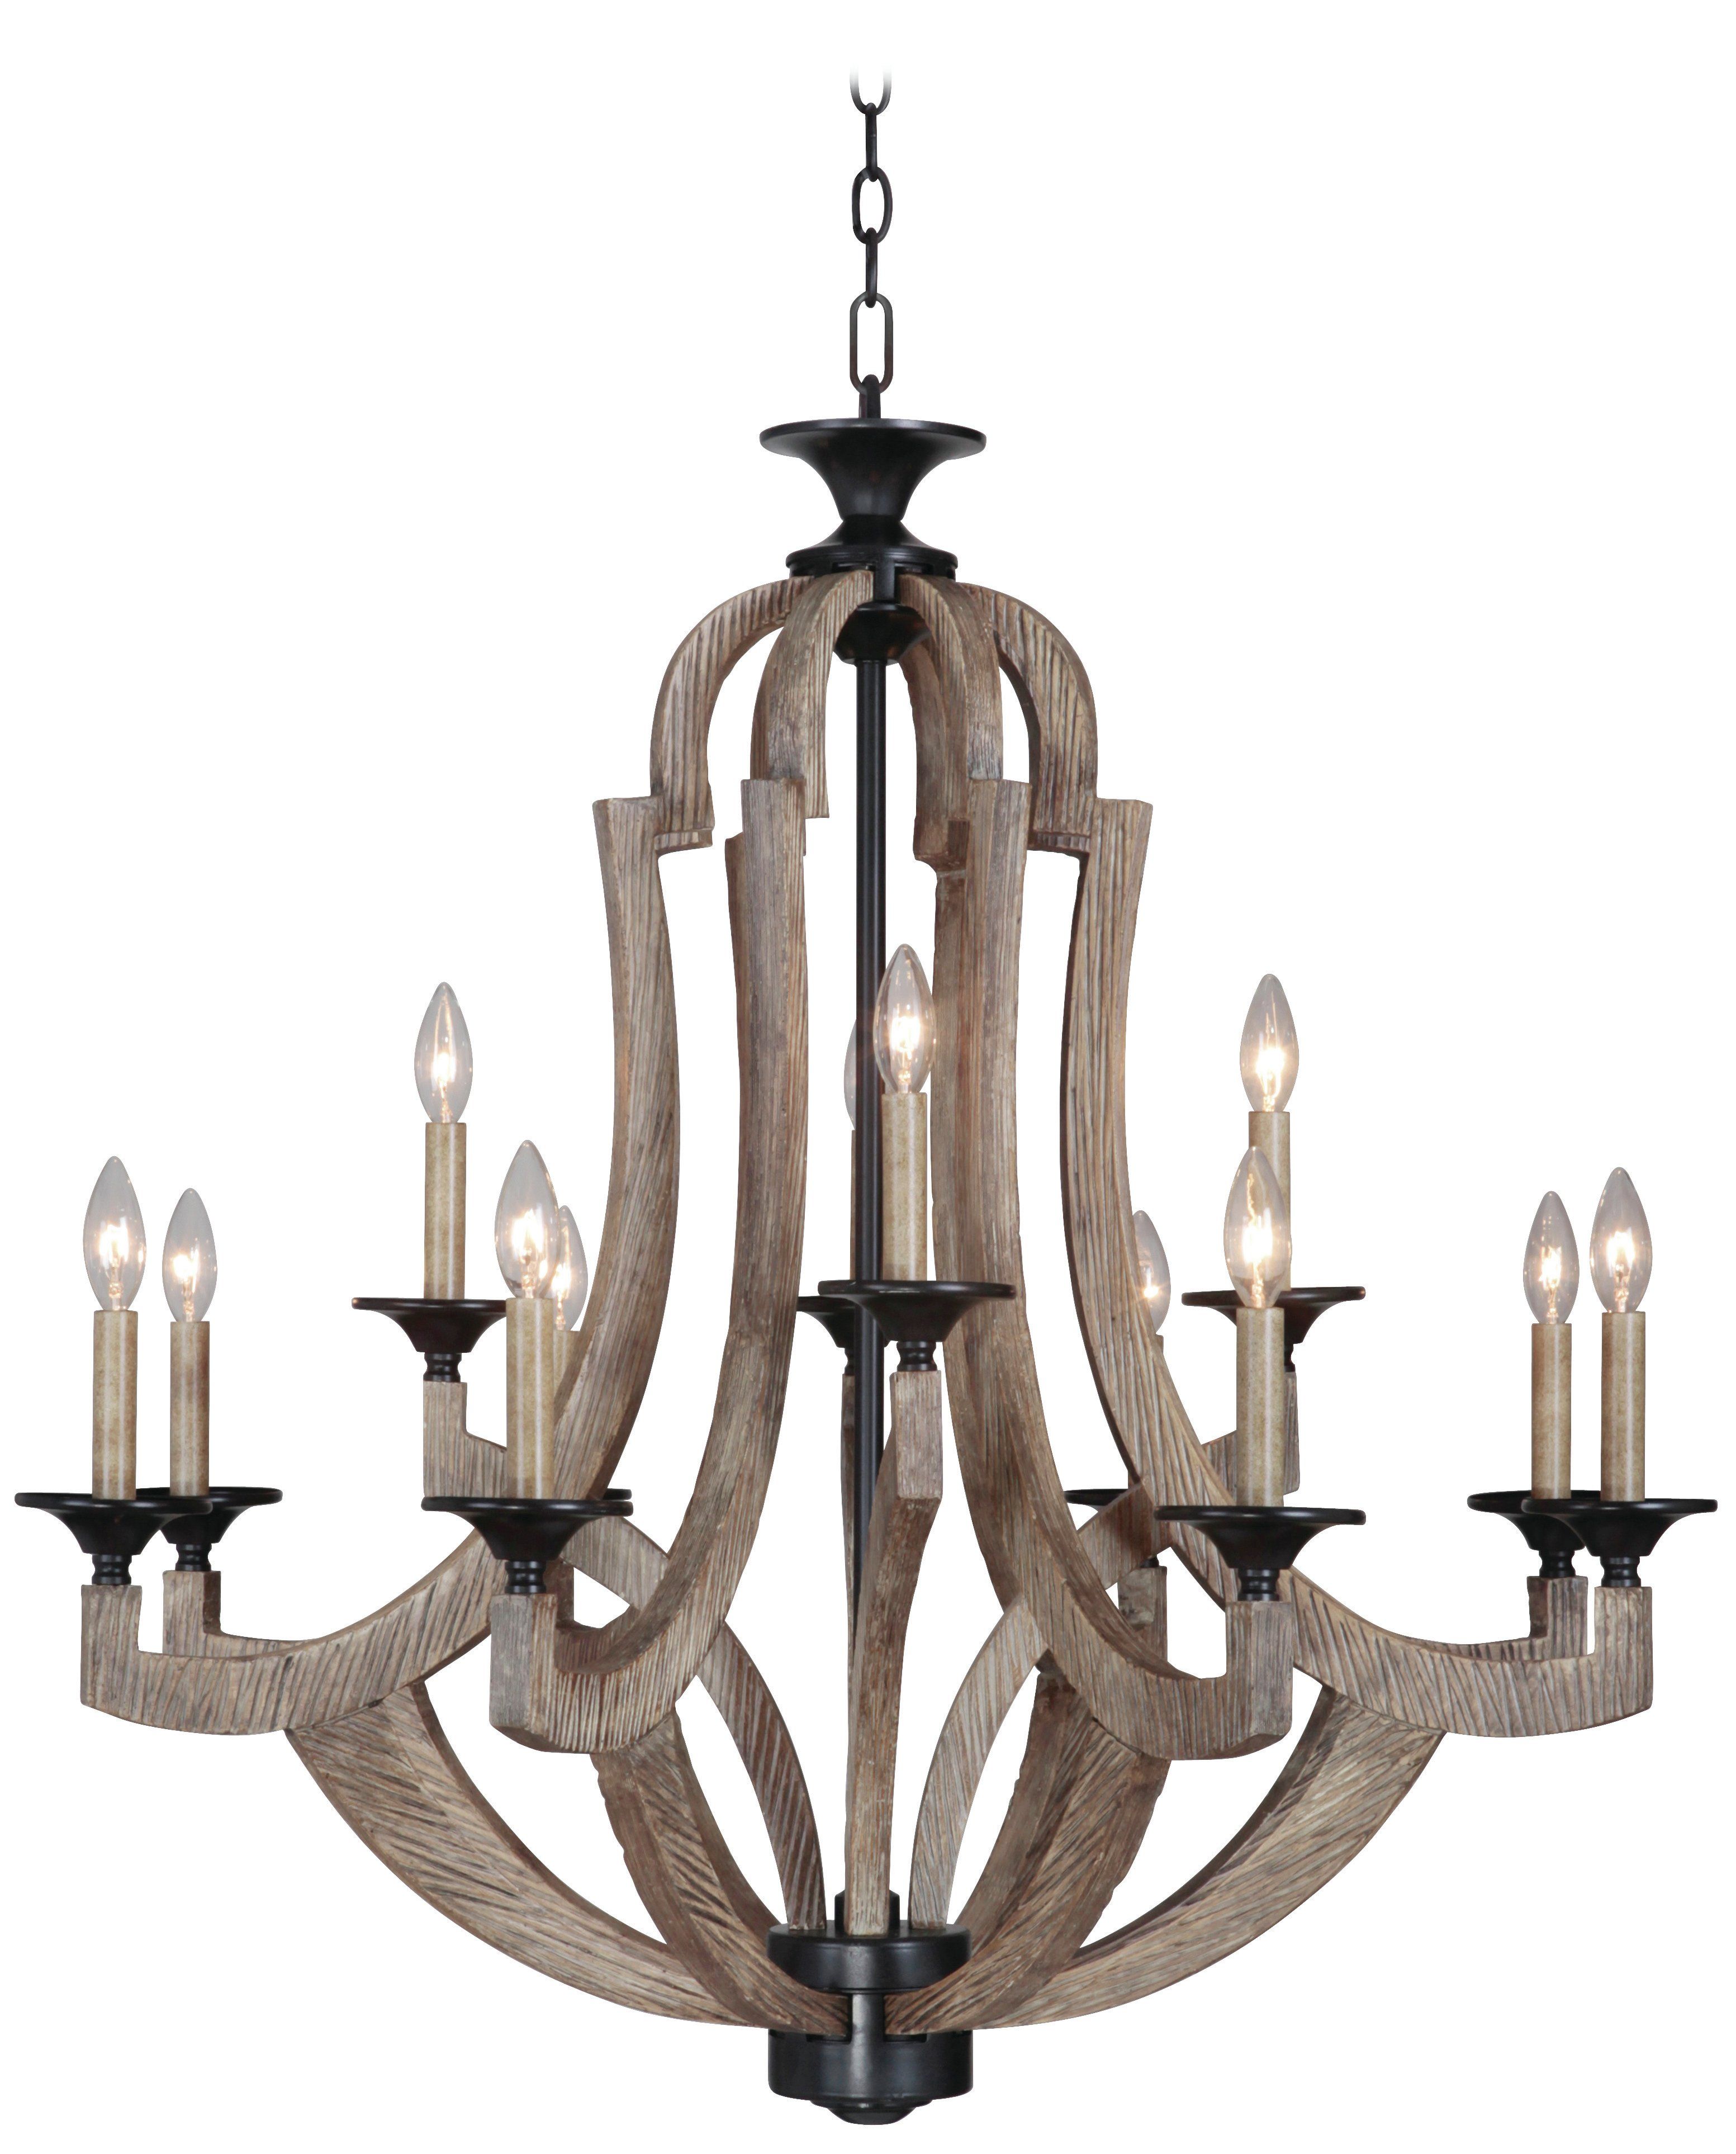 Farmhouse & Rustic Sloped Ceiling Adaptable Chandeliers Inside Taya 4 Light Lantern Square Pendants (View 22 of 30)